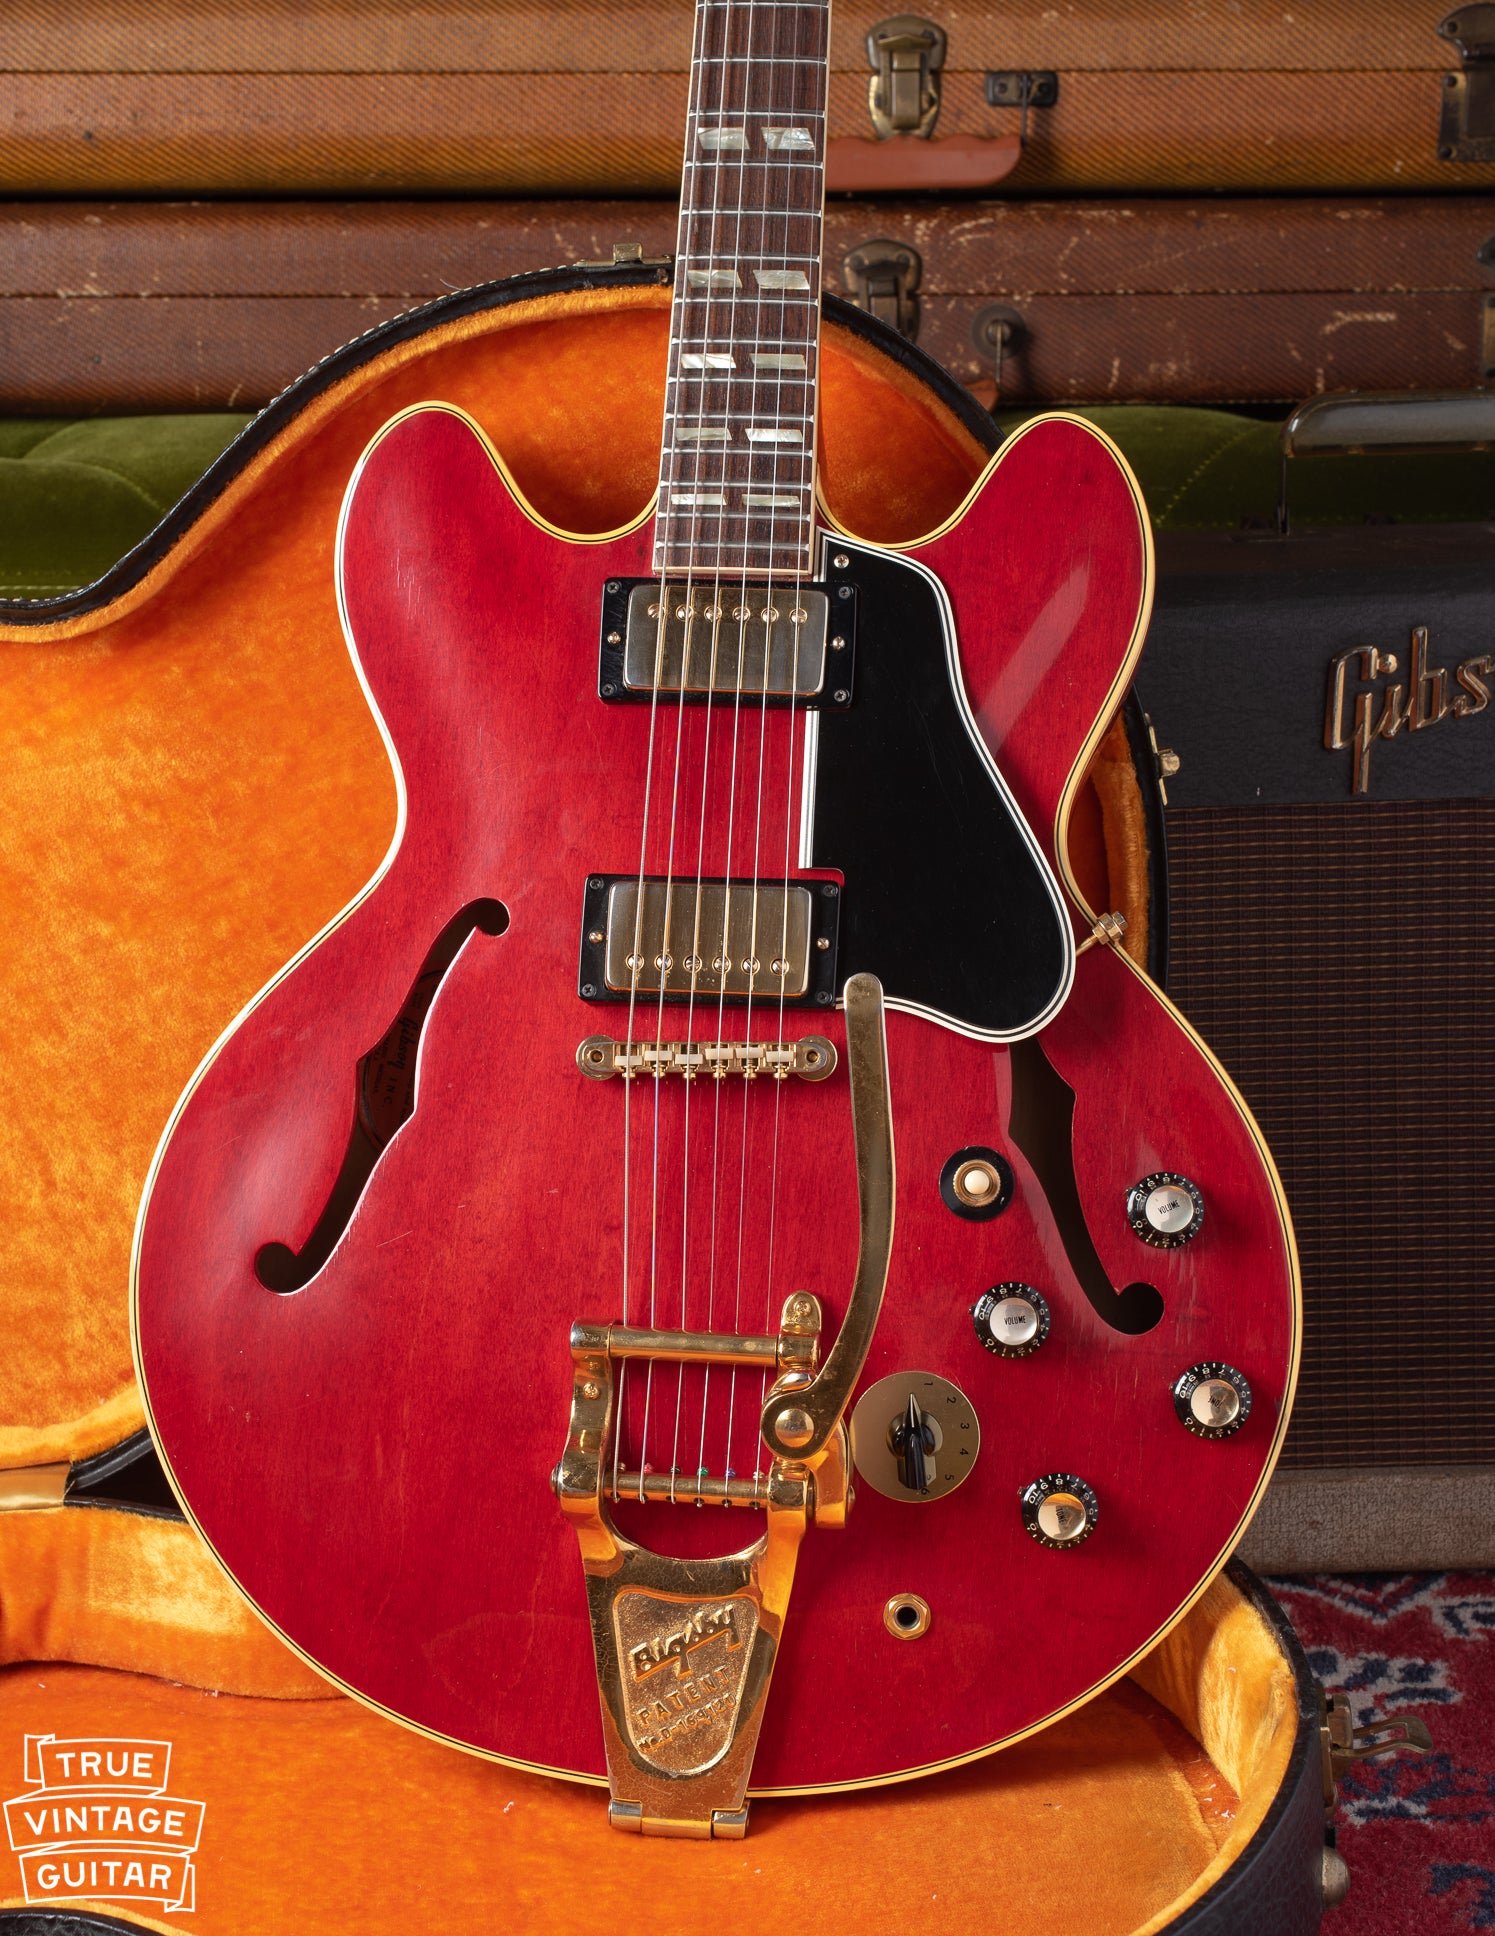 Gibson ES-345 1966 red guitar with gold parts